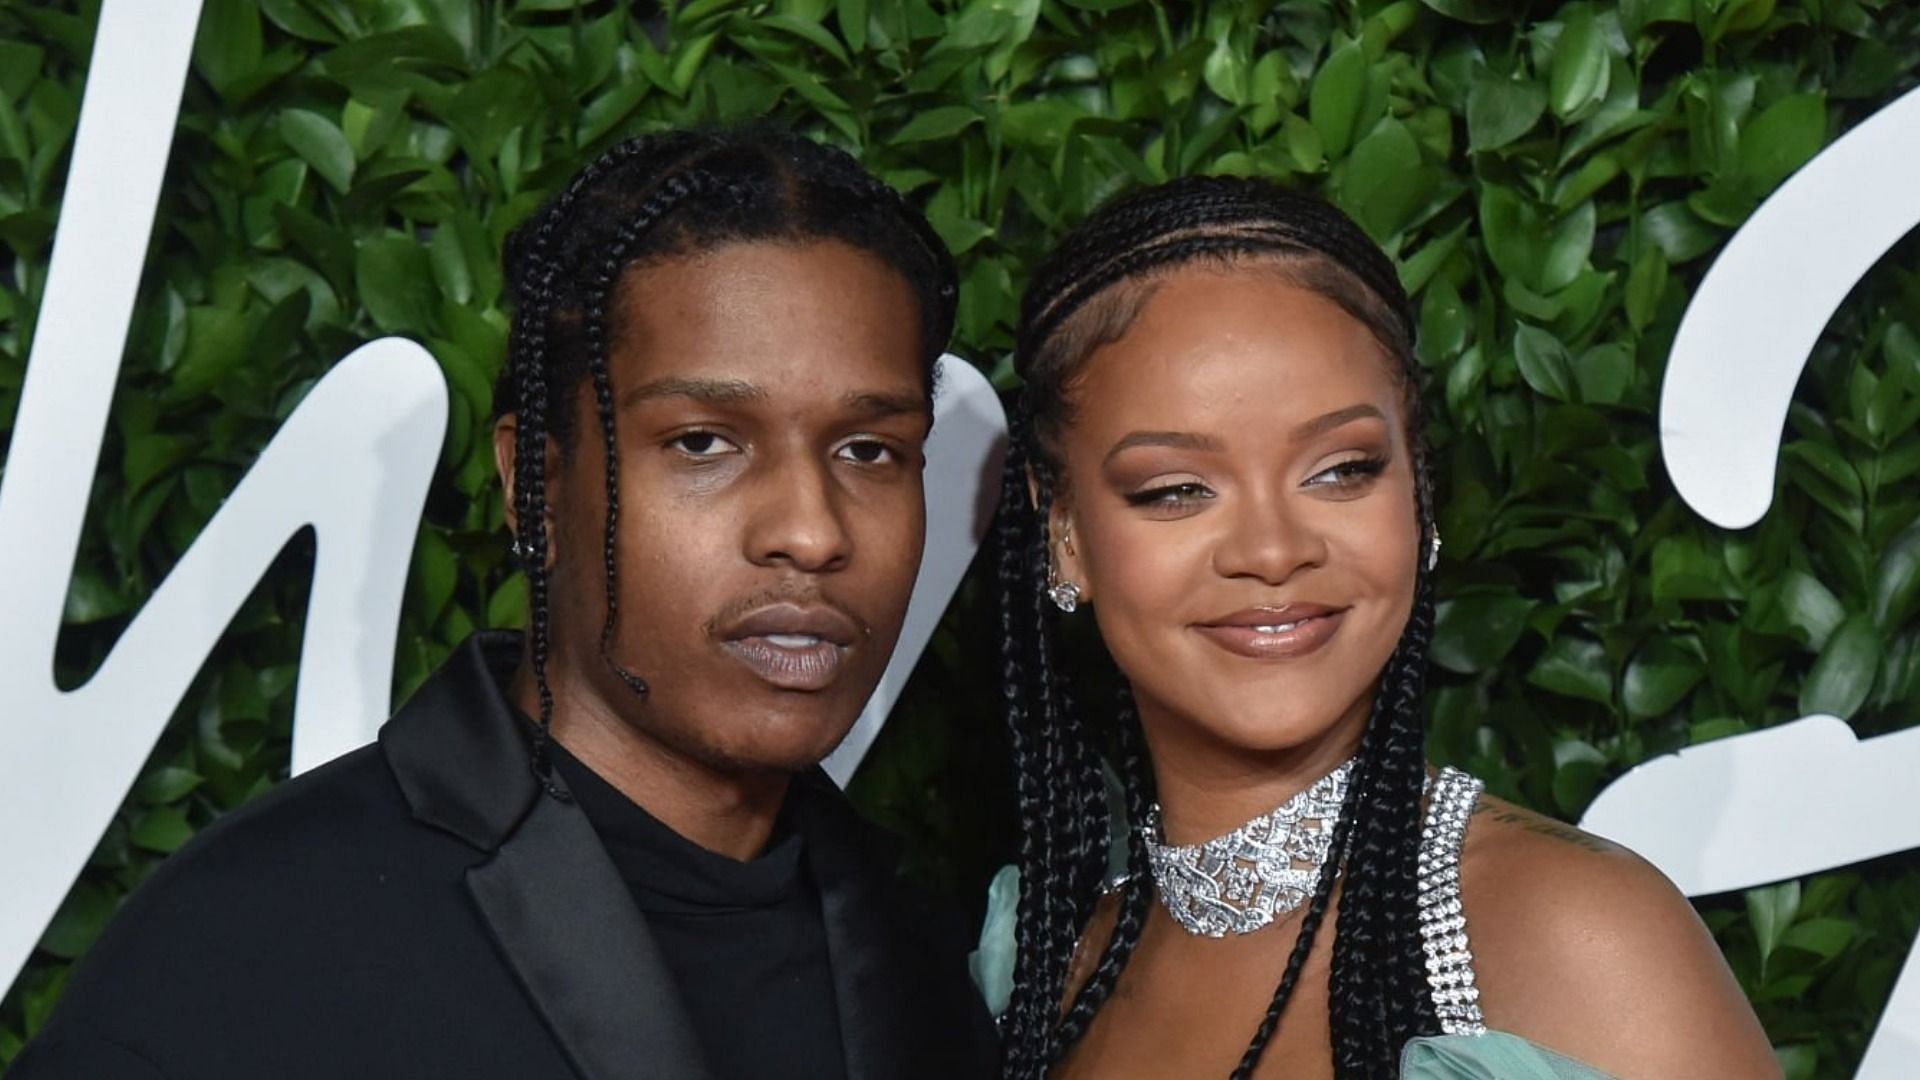 Sources close to Rihanna and ASAP Rocky debunked their split and cheating rumors (Image via Stephane Cardinale/Getty Images)